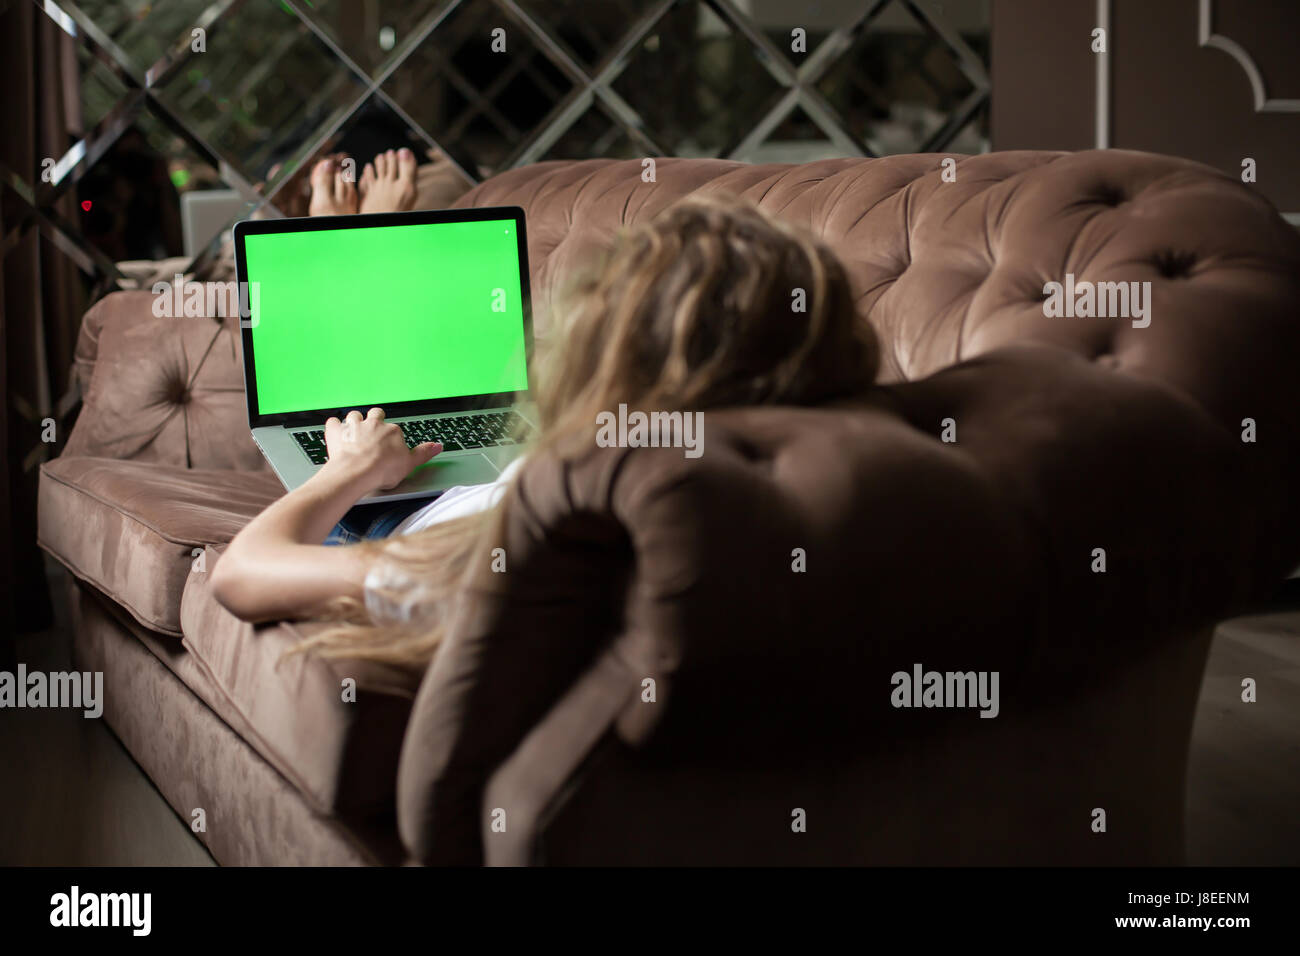 Blonde lying on the sofa with the laptop. Green screen. Stock Photo